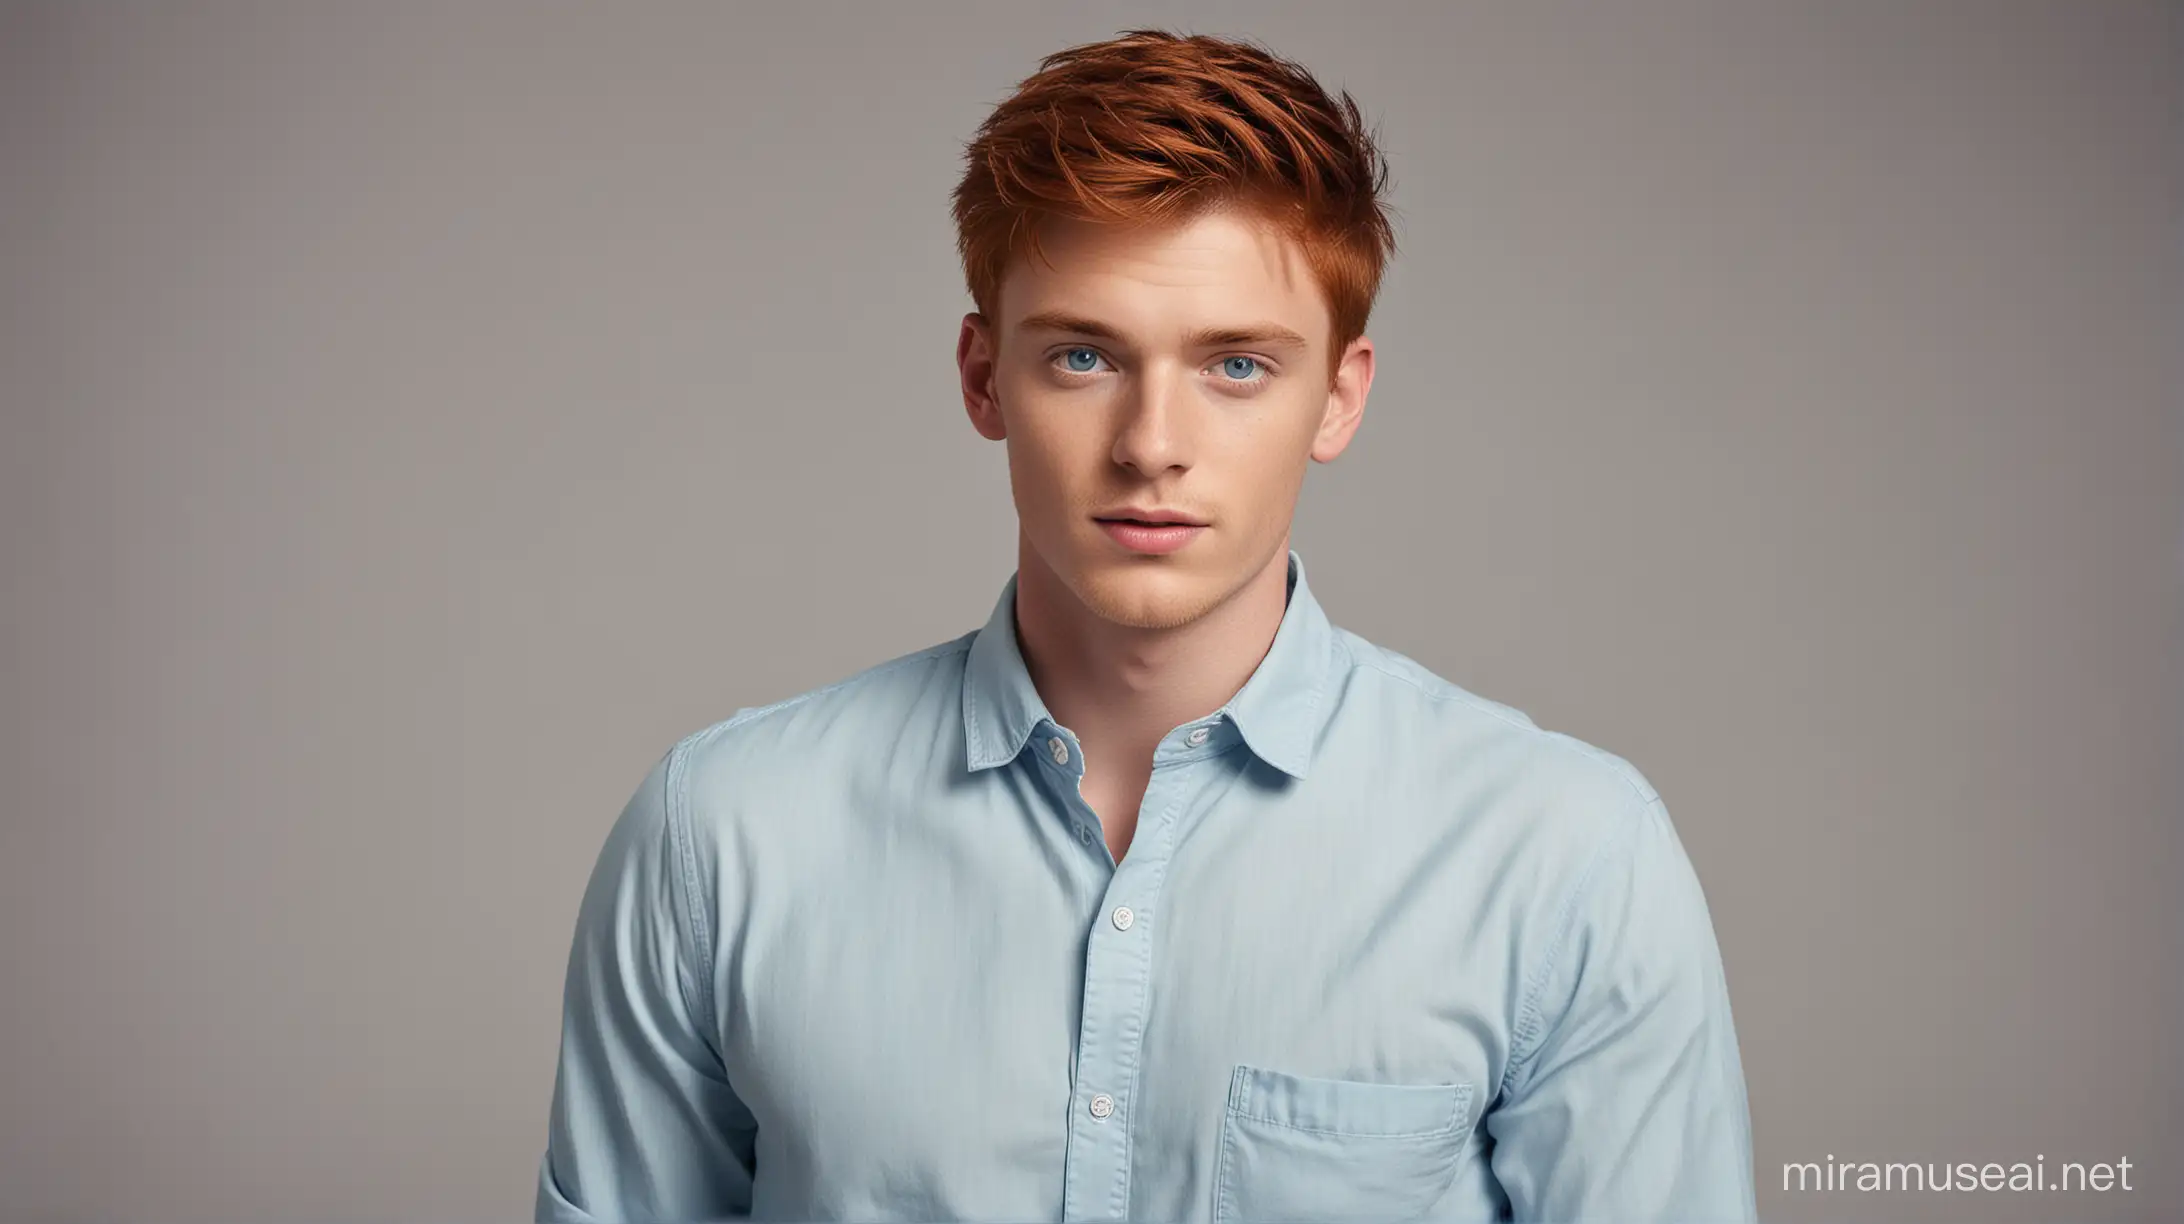 Red hair and blue eyes 25 years old boy wearing a long sleeve shirt with a trouser.